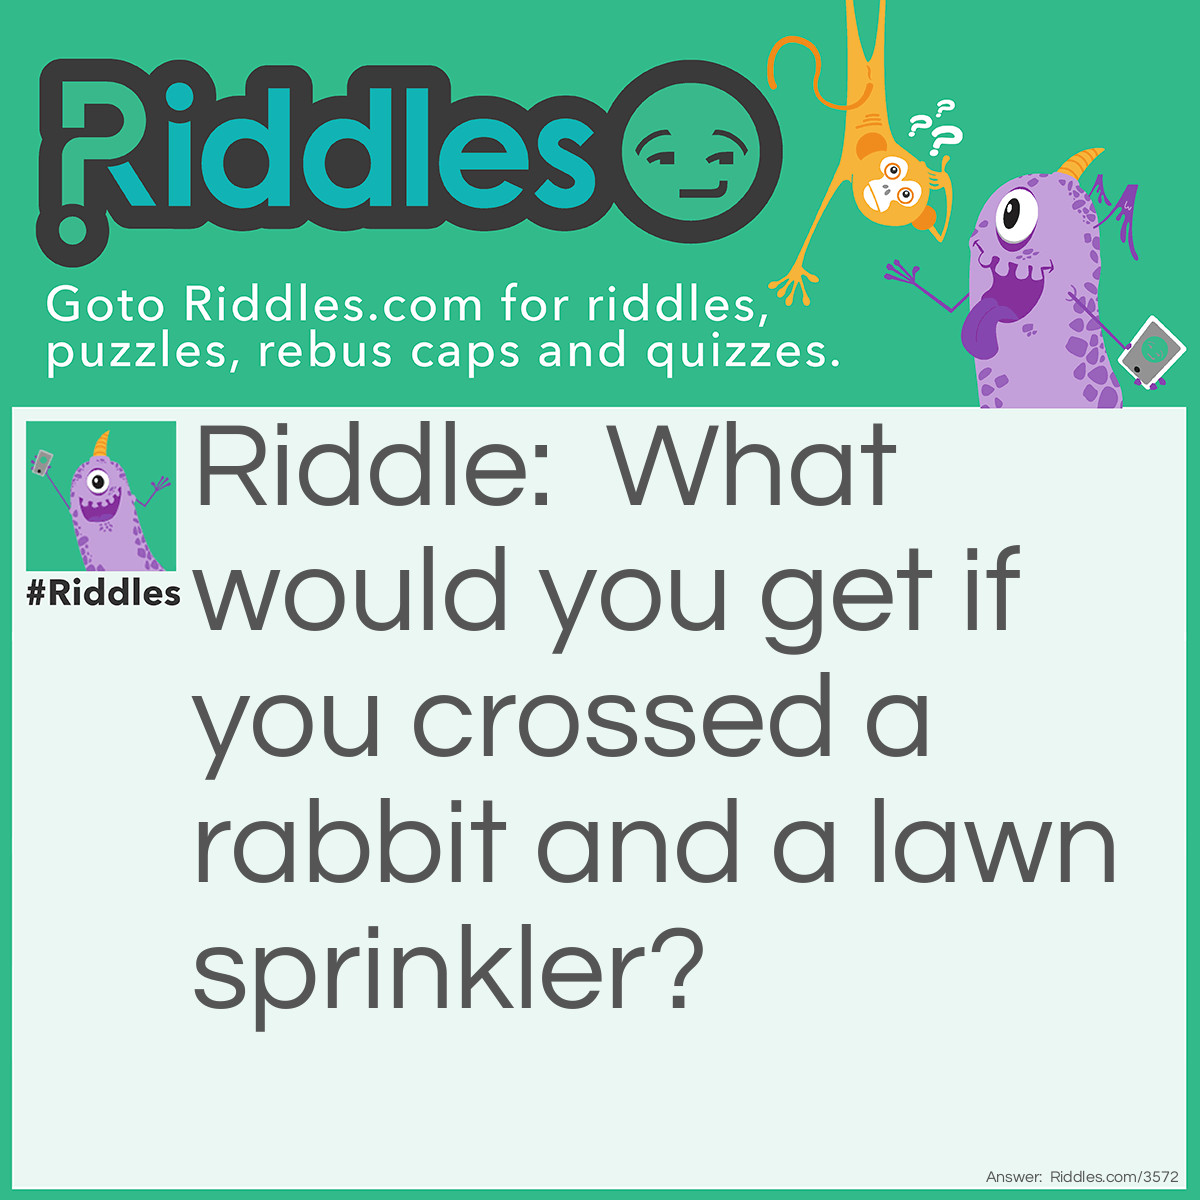 Riddle: What would you get if you crossed a rabbit and a lawn sprinkler? Answer: Hare spray.